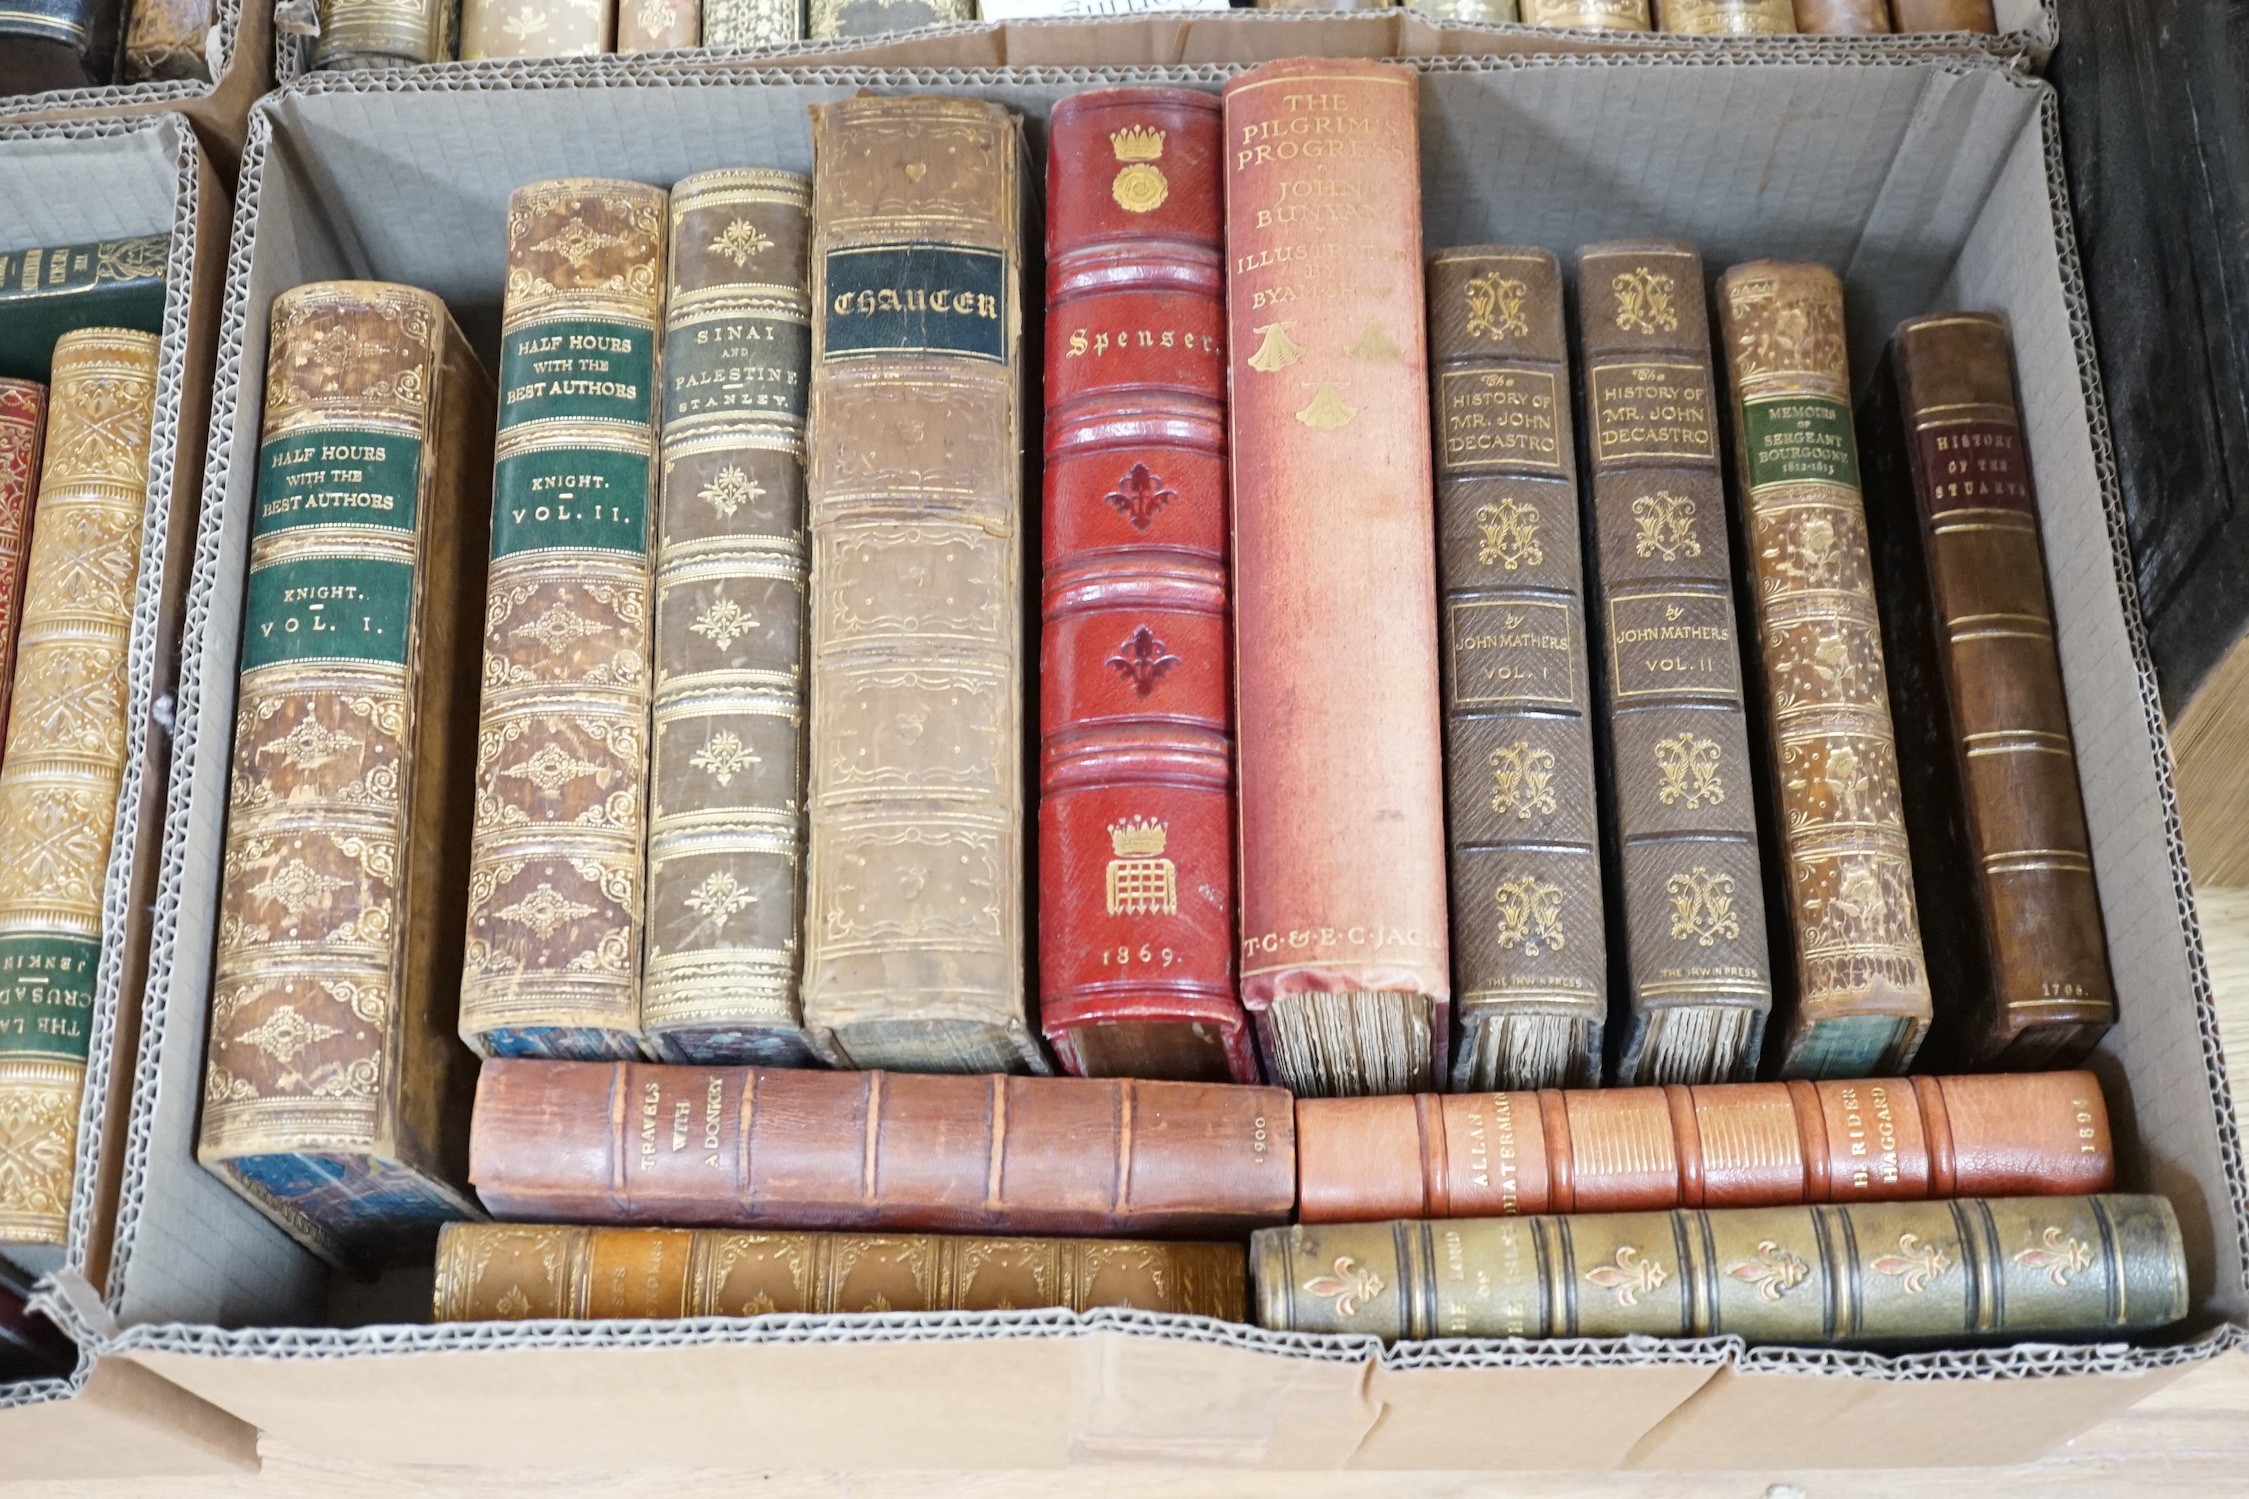 Five boxes of mixed leather bound books, including History of Chrivalry, Chaucer, Stories from Wagner, War and Peace and The Conquest of Granada, including a large leather bound bible